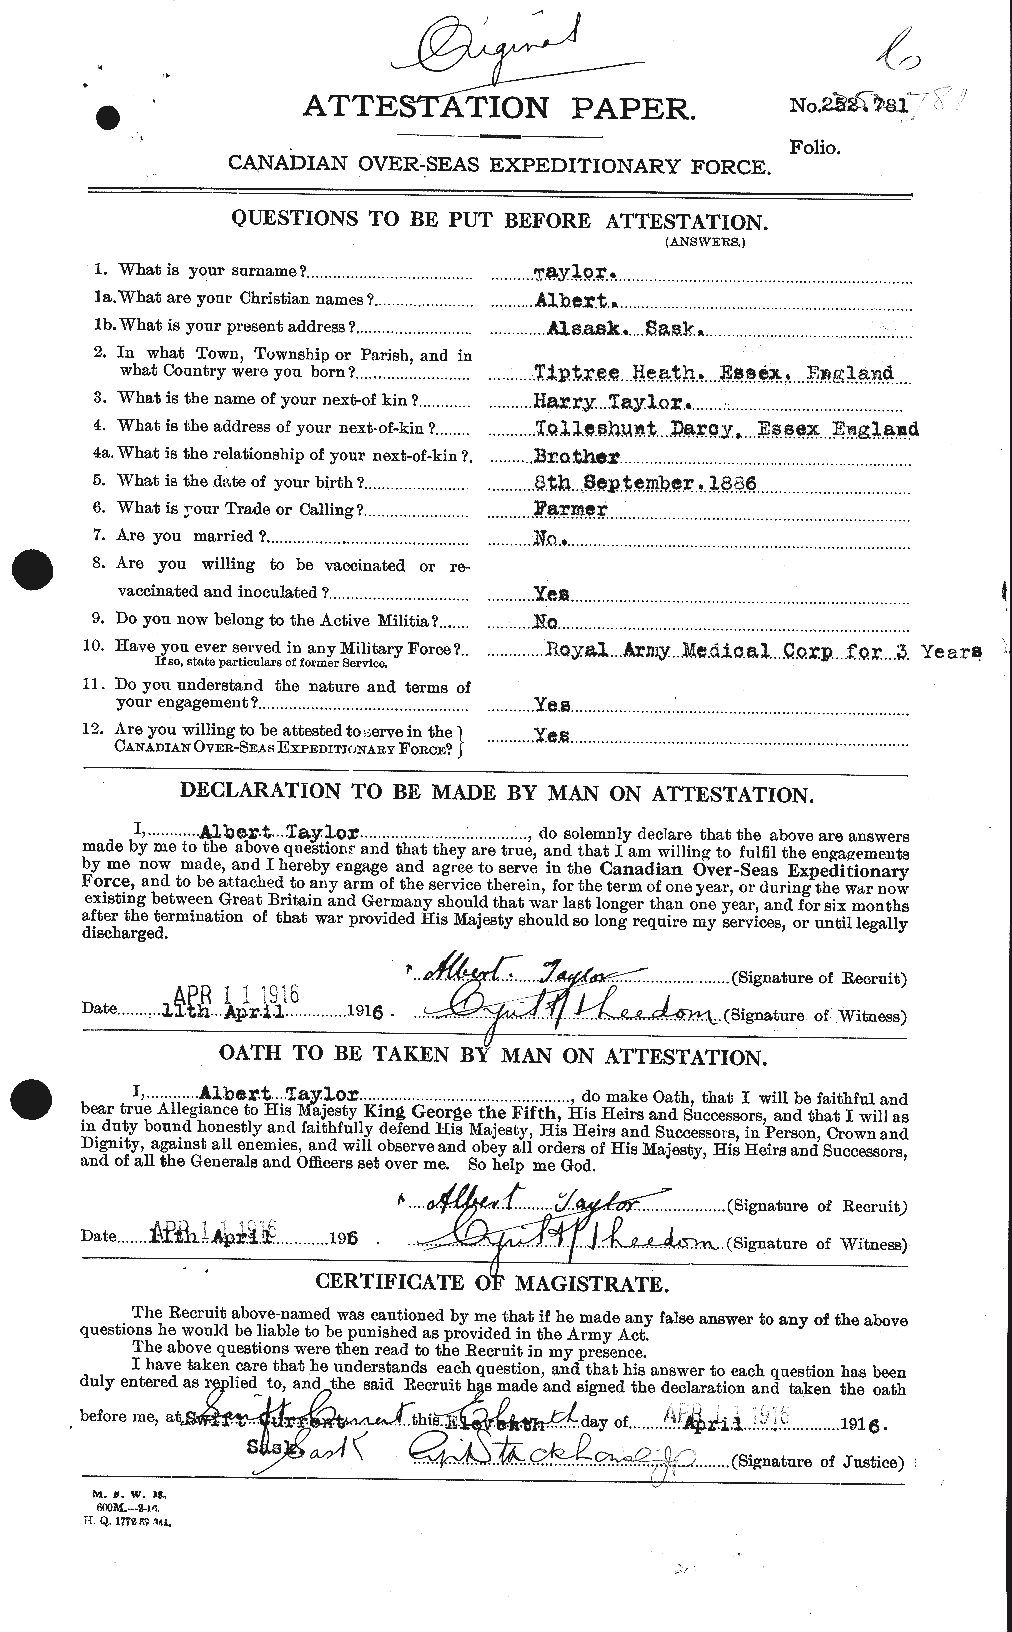 Personnel Records of the First World War - CEF 626092a